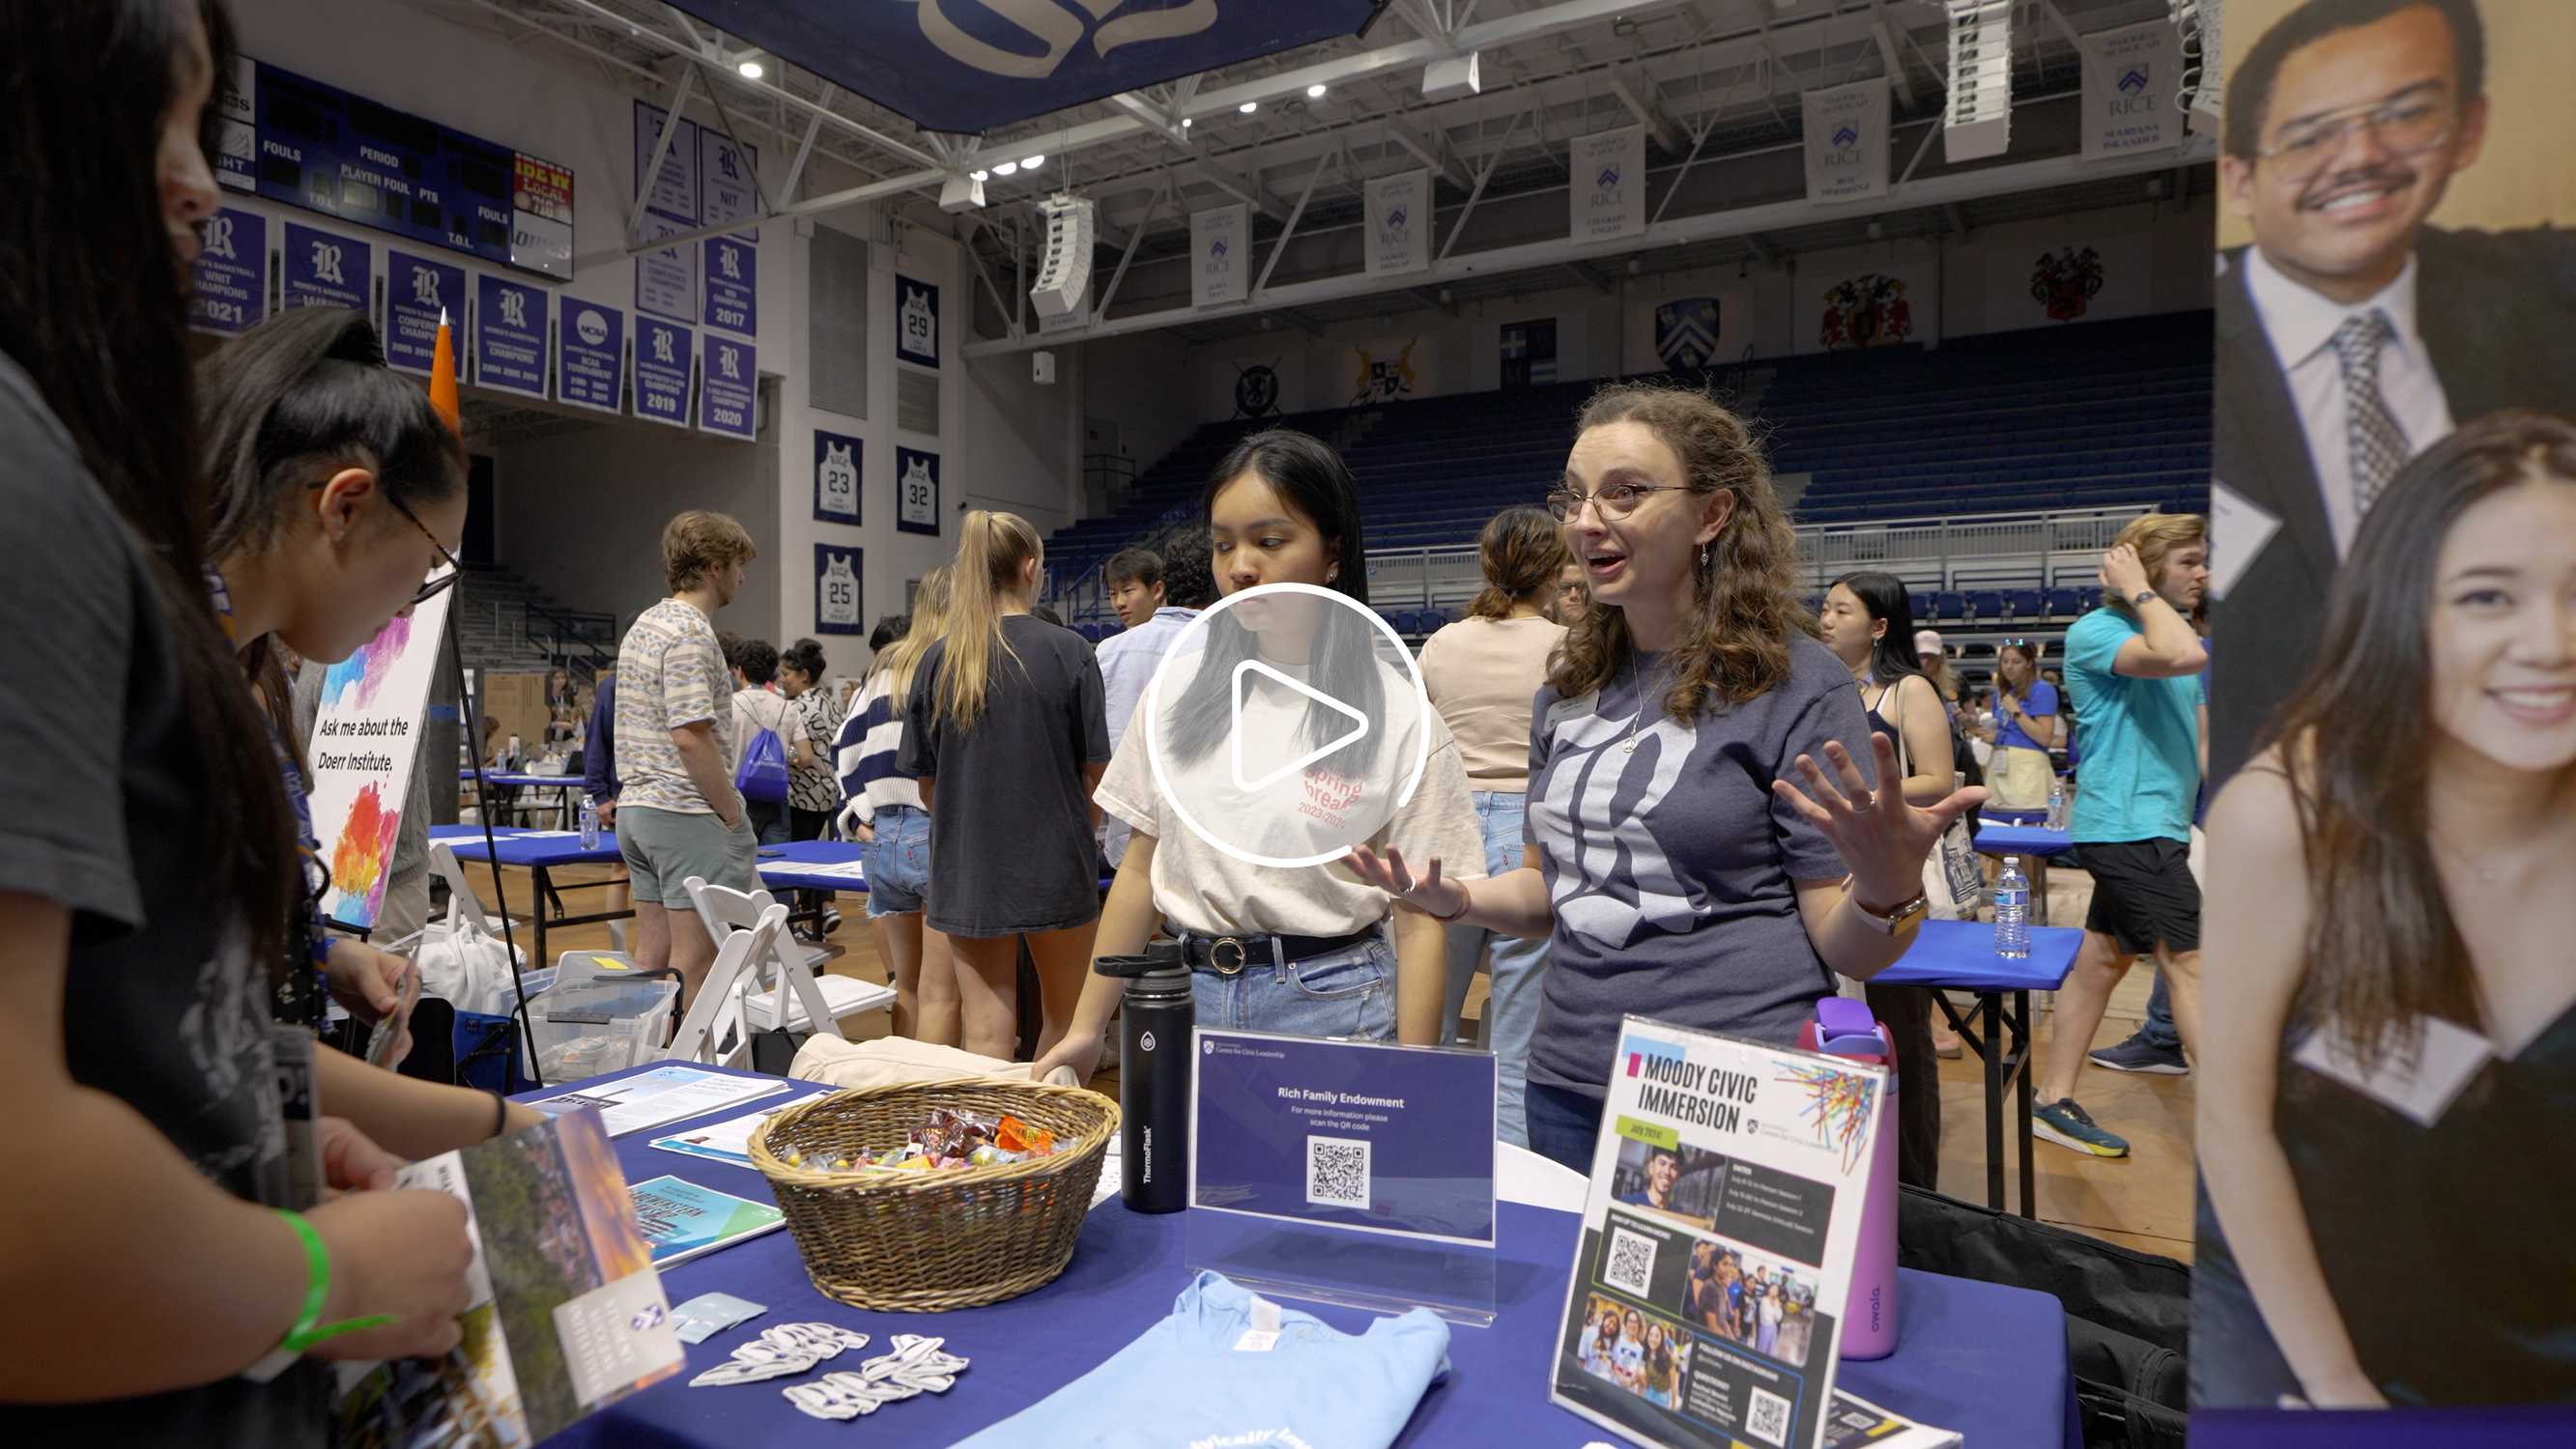 Current rice students talking to admitted students at the student fair.